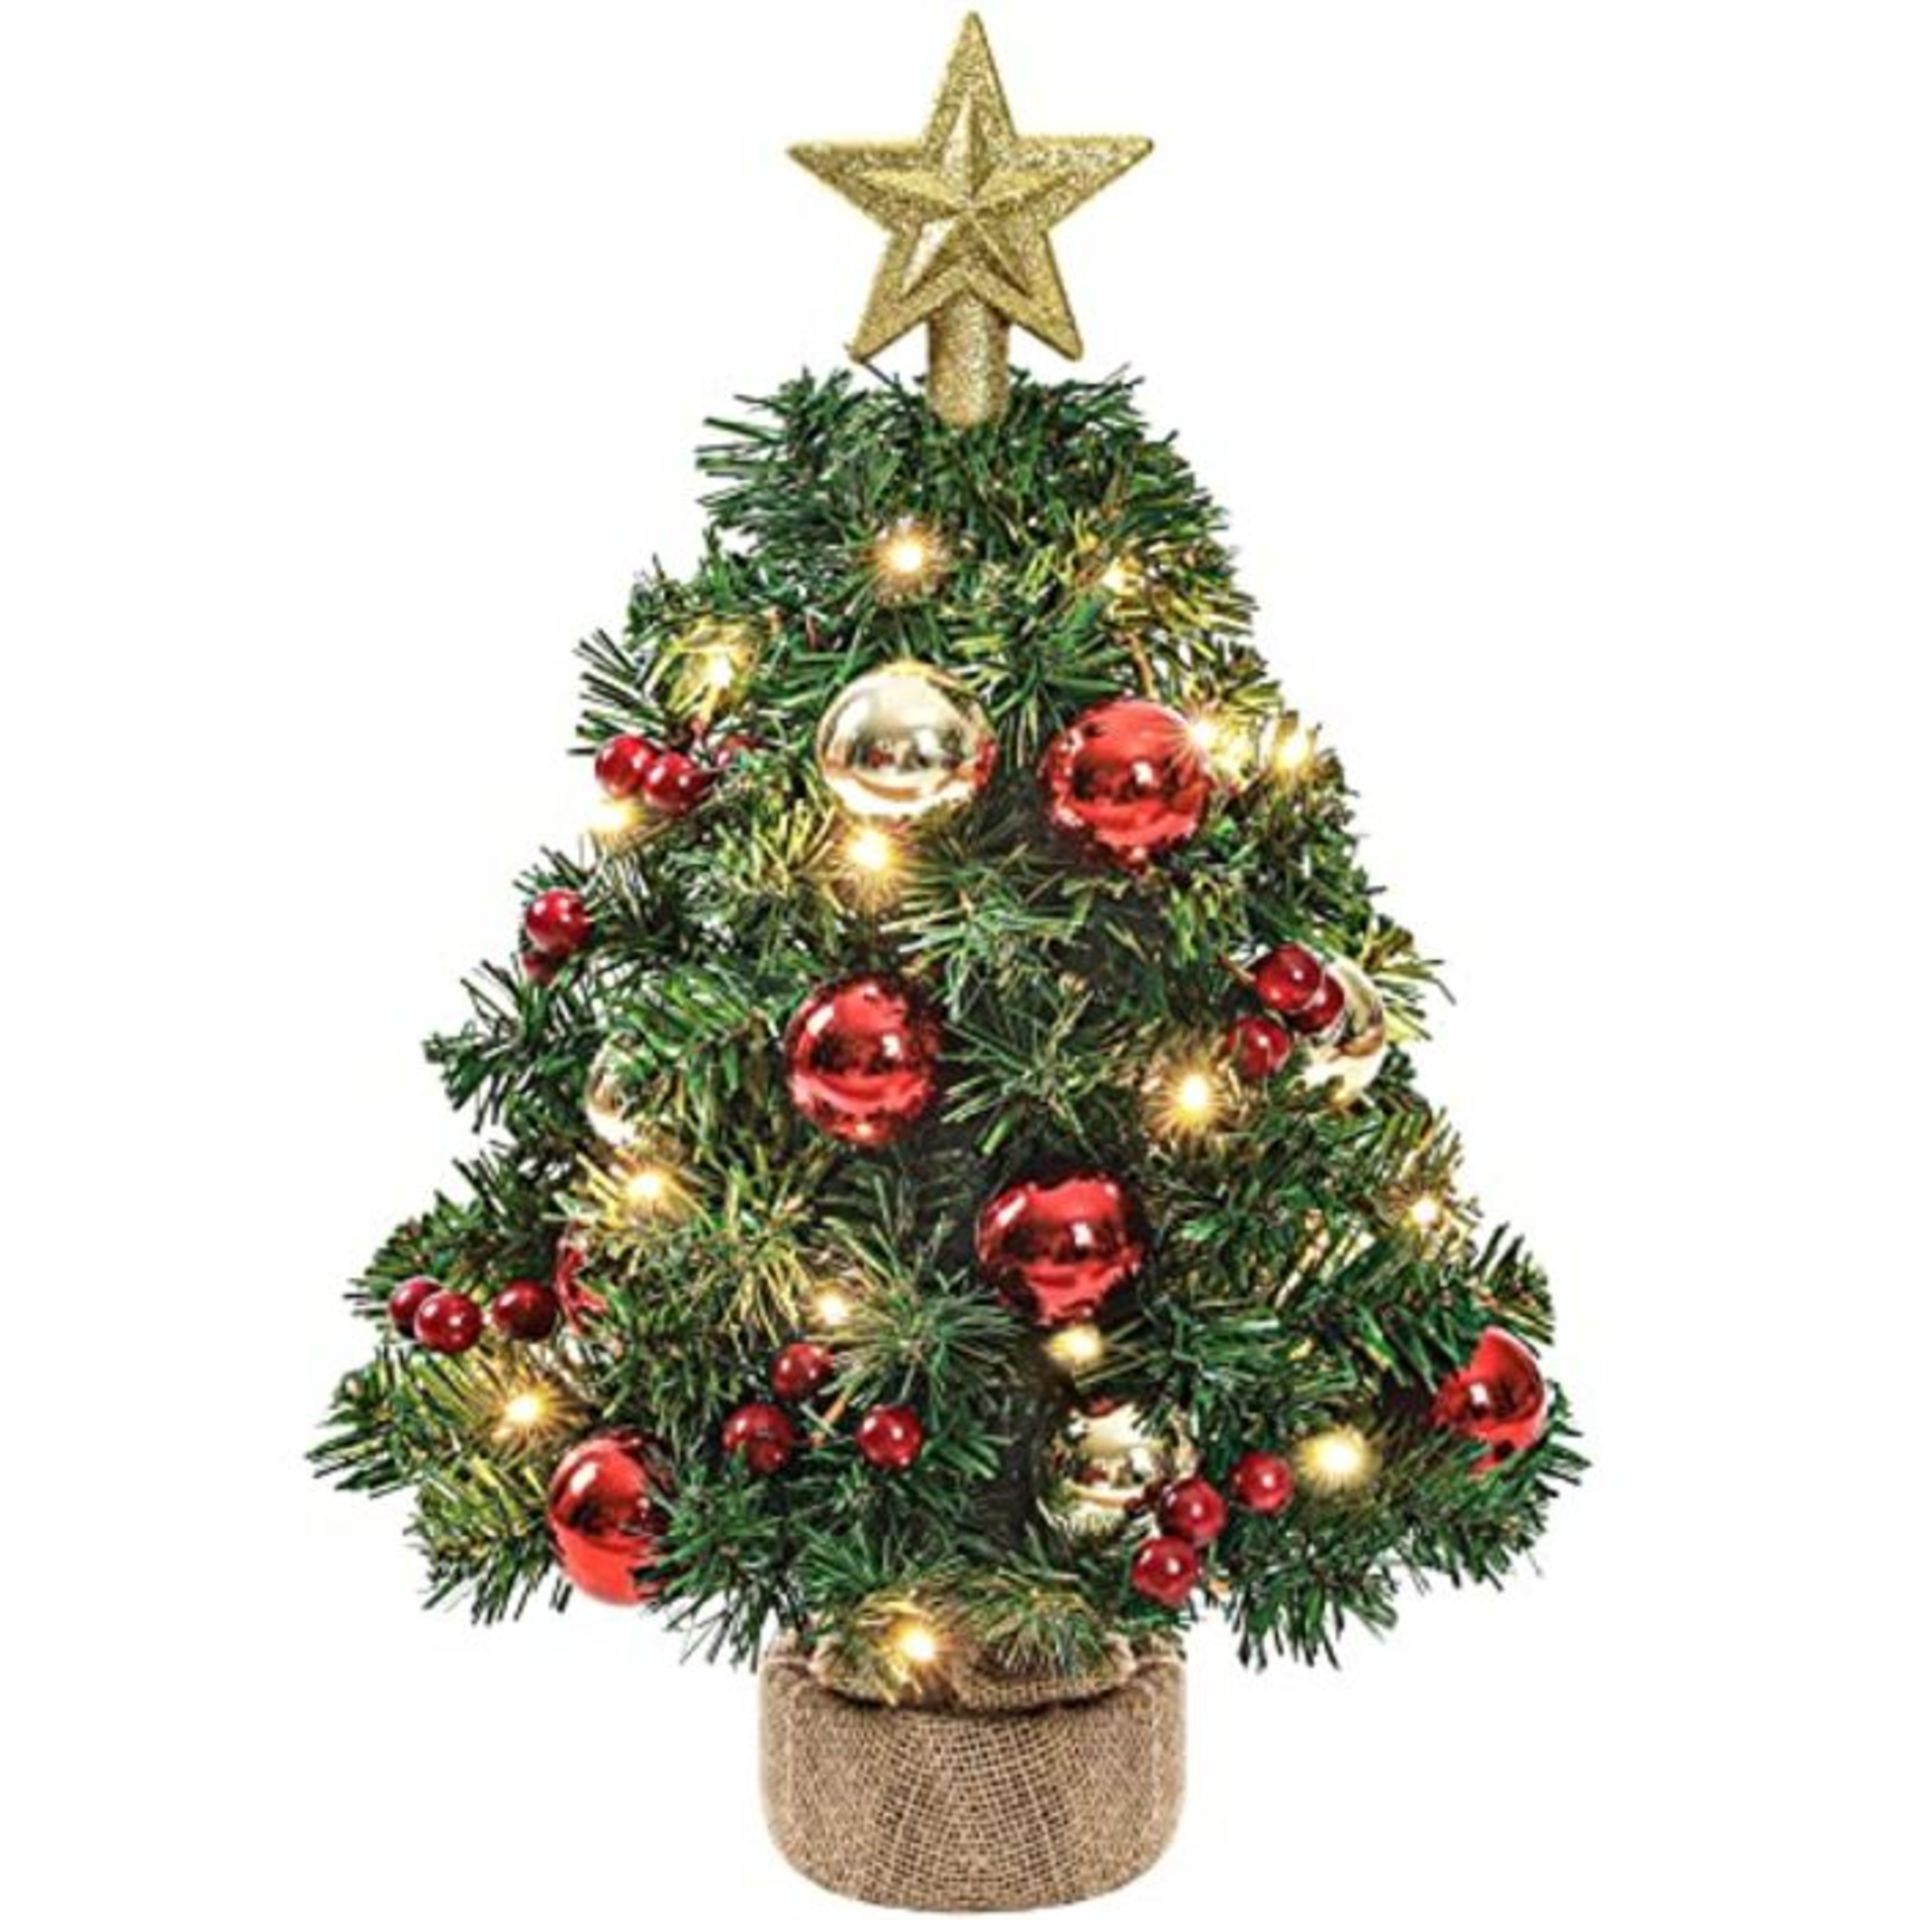 [CRACKED] Yorbay Small Christmas Tree with 20 LED Light Baubles Star Topper 40cm Batte